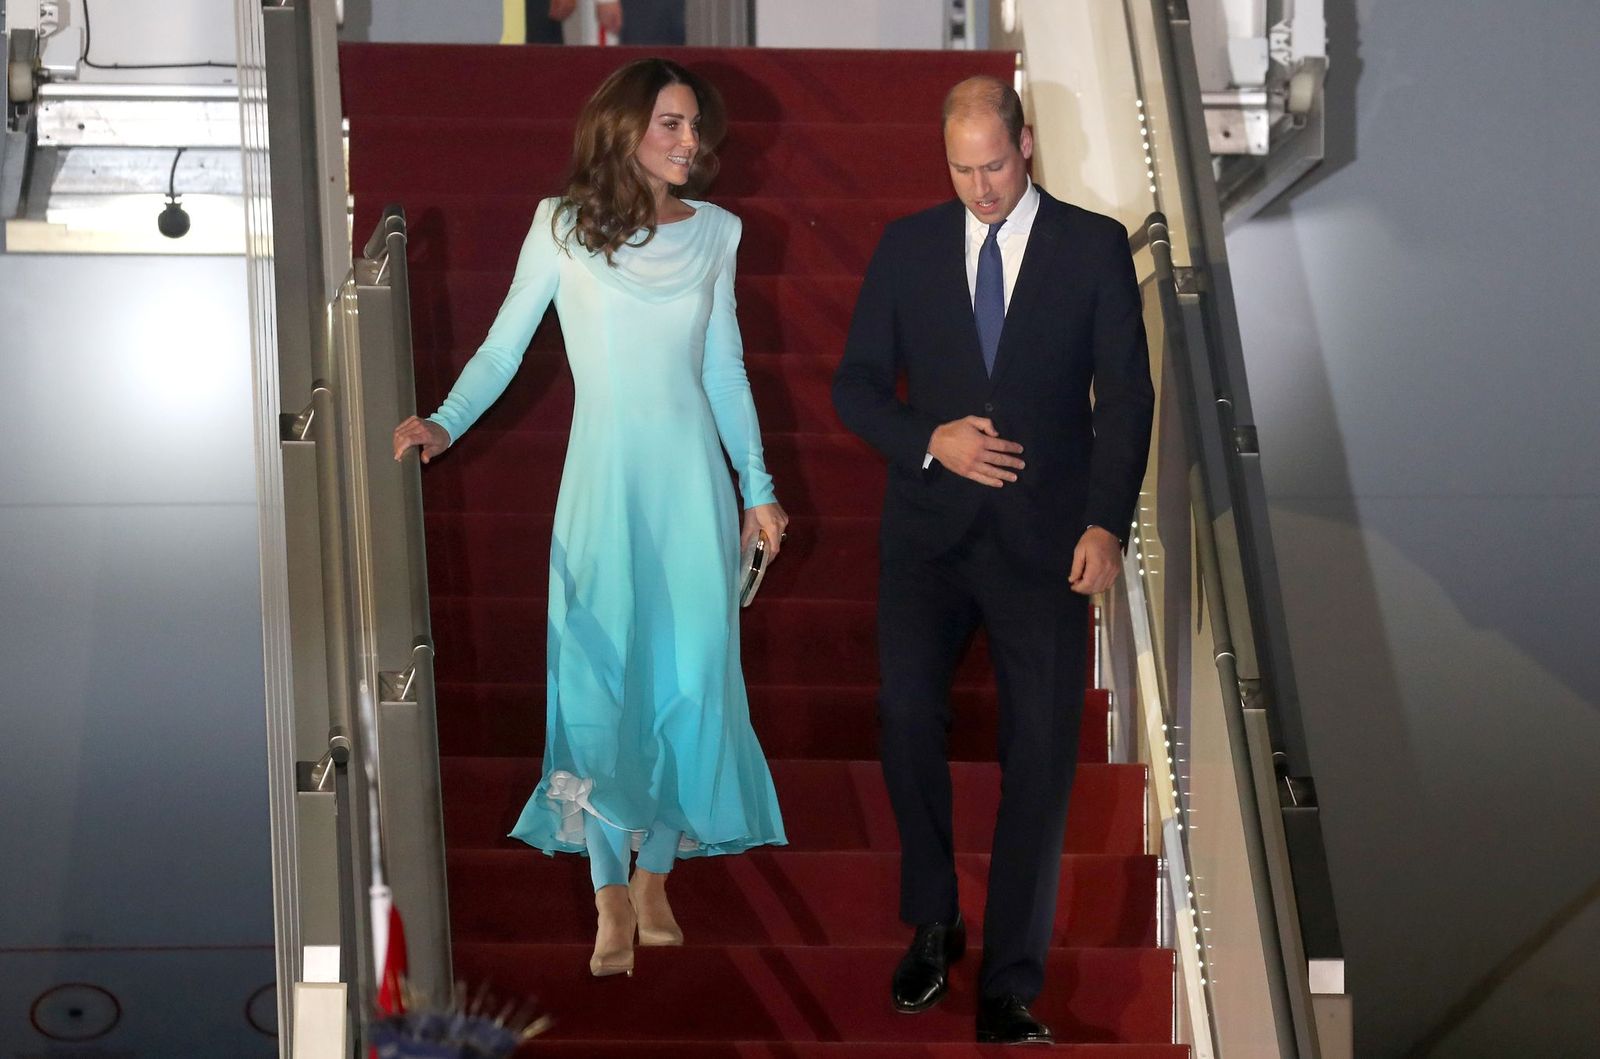 Kate Middleton and Prince William at Kur Khan airbase ahead of their royal tour of Pakistan on October 14, 2019 | Photo: Getty Images